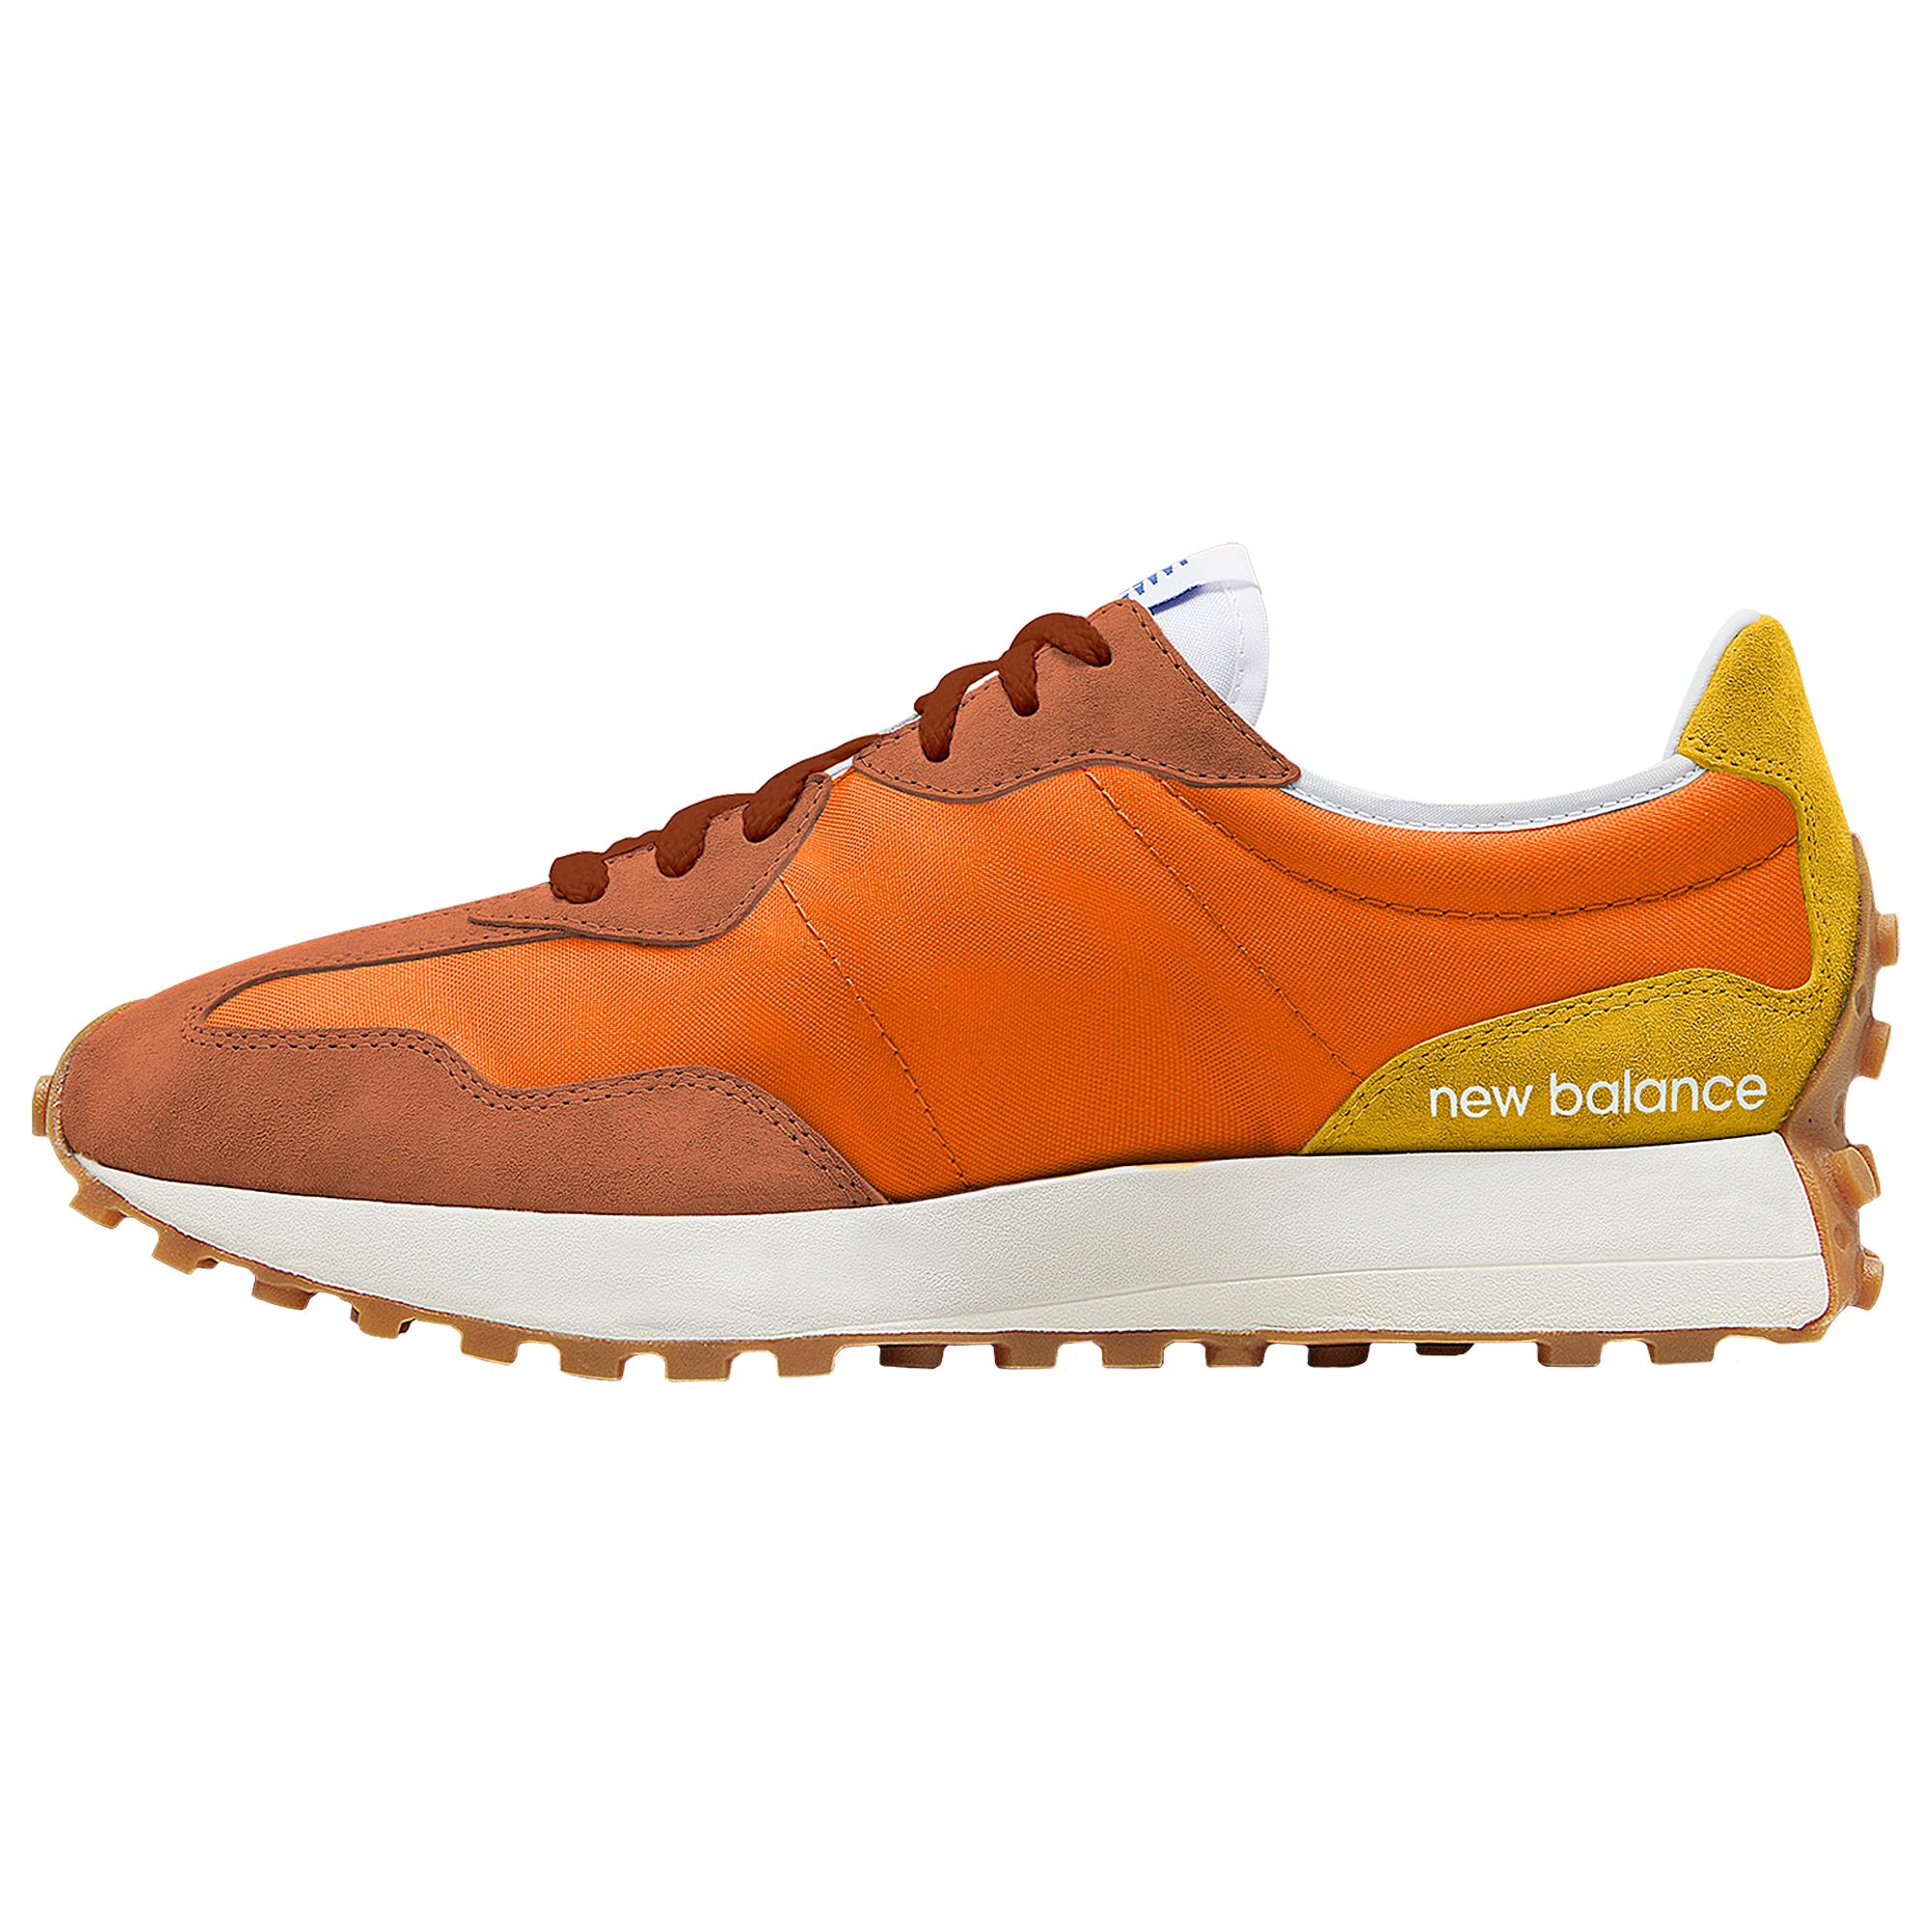 New Balance Suede 327 - Shoes in Orange for Men - Lyst